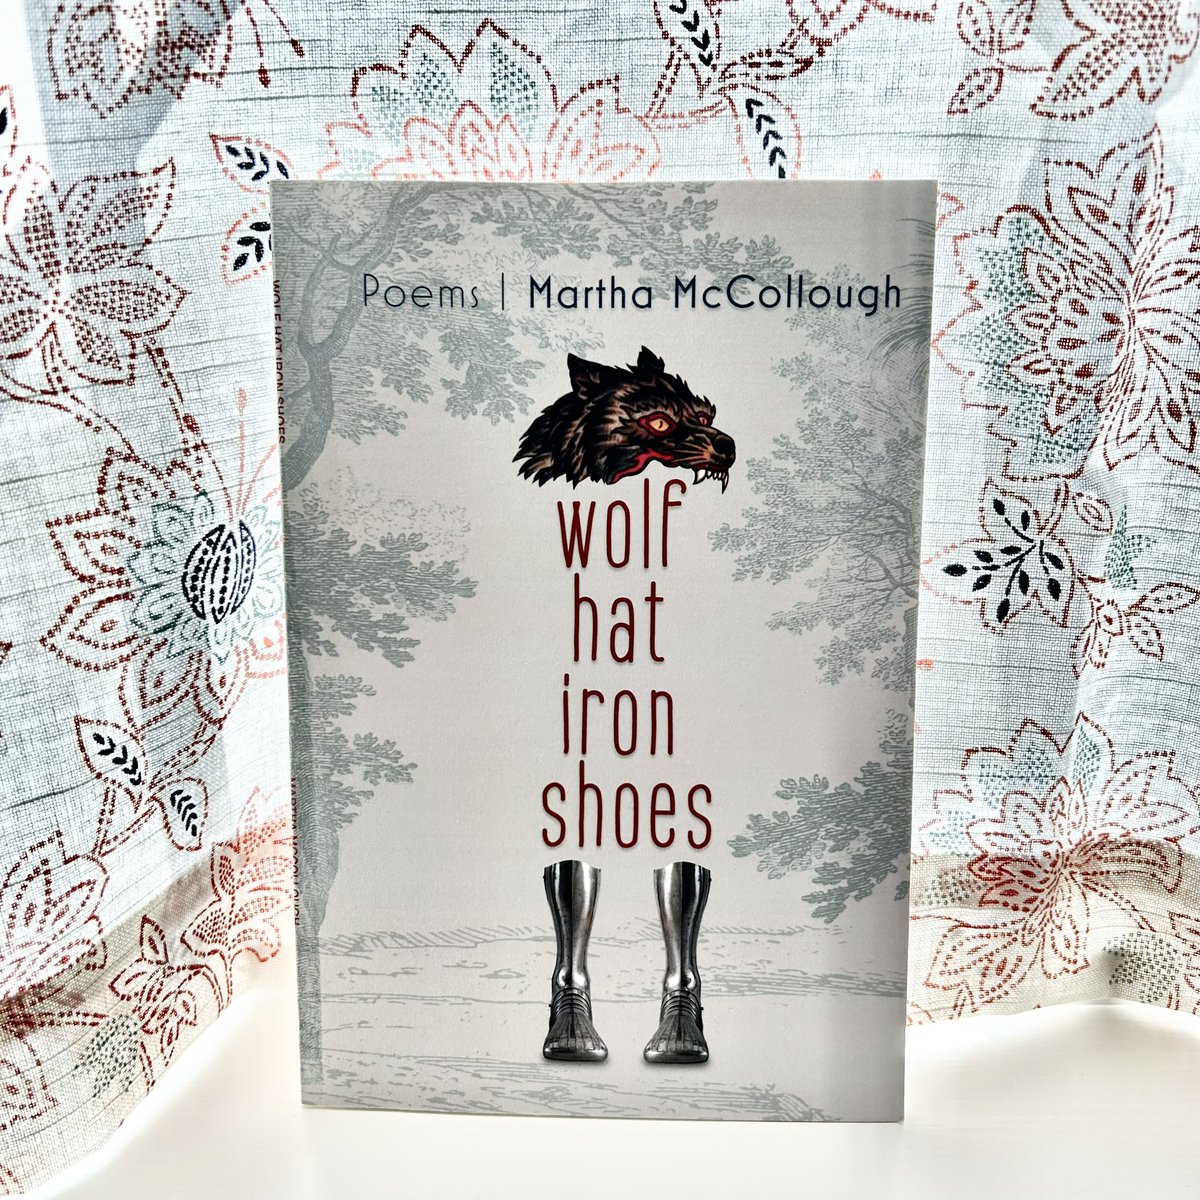 Summer reading: WOLF HAT IRON SHOES by Martha McCollough (Lily Poetry Review Books, 2022), a book of owls, insects, black apples, myths, moons, strangeness, wolves, plague, imagination, coins, bees, flame, time, and space. ♥️ @PoetryLily